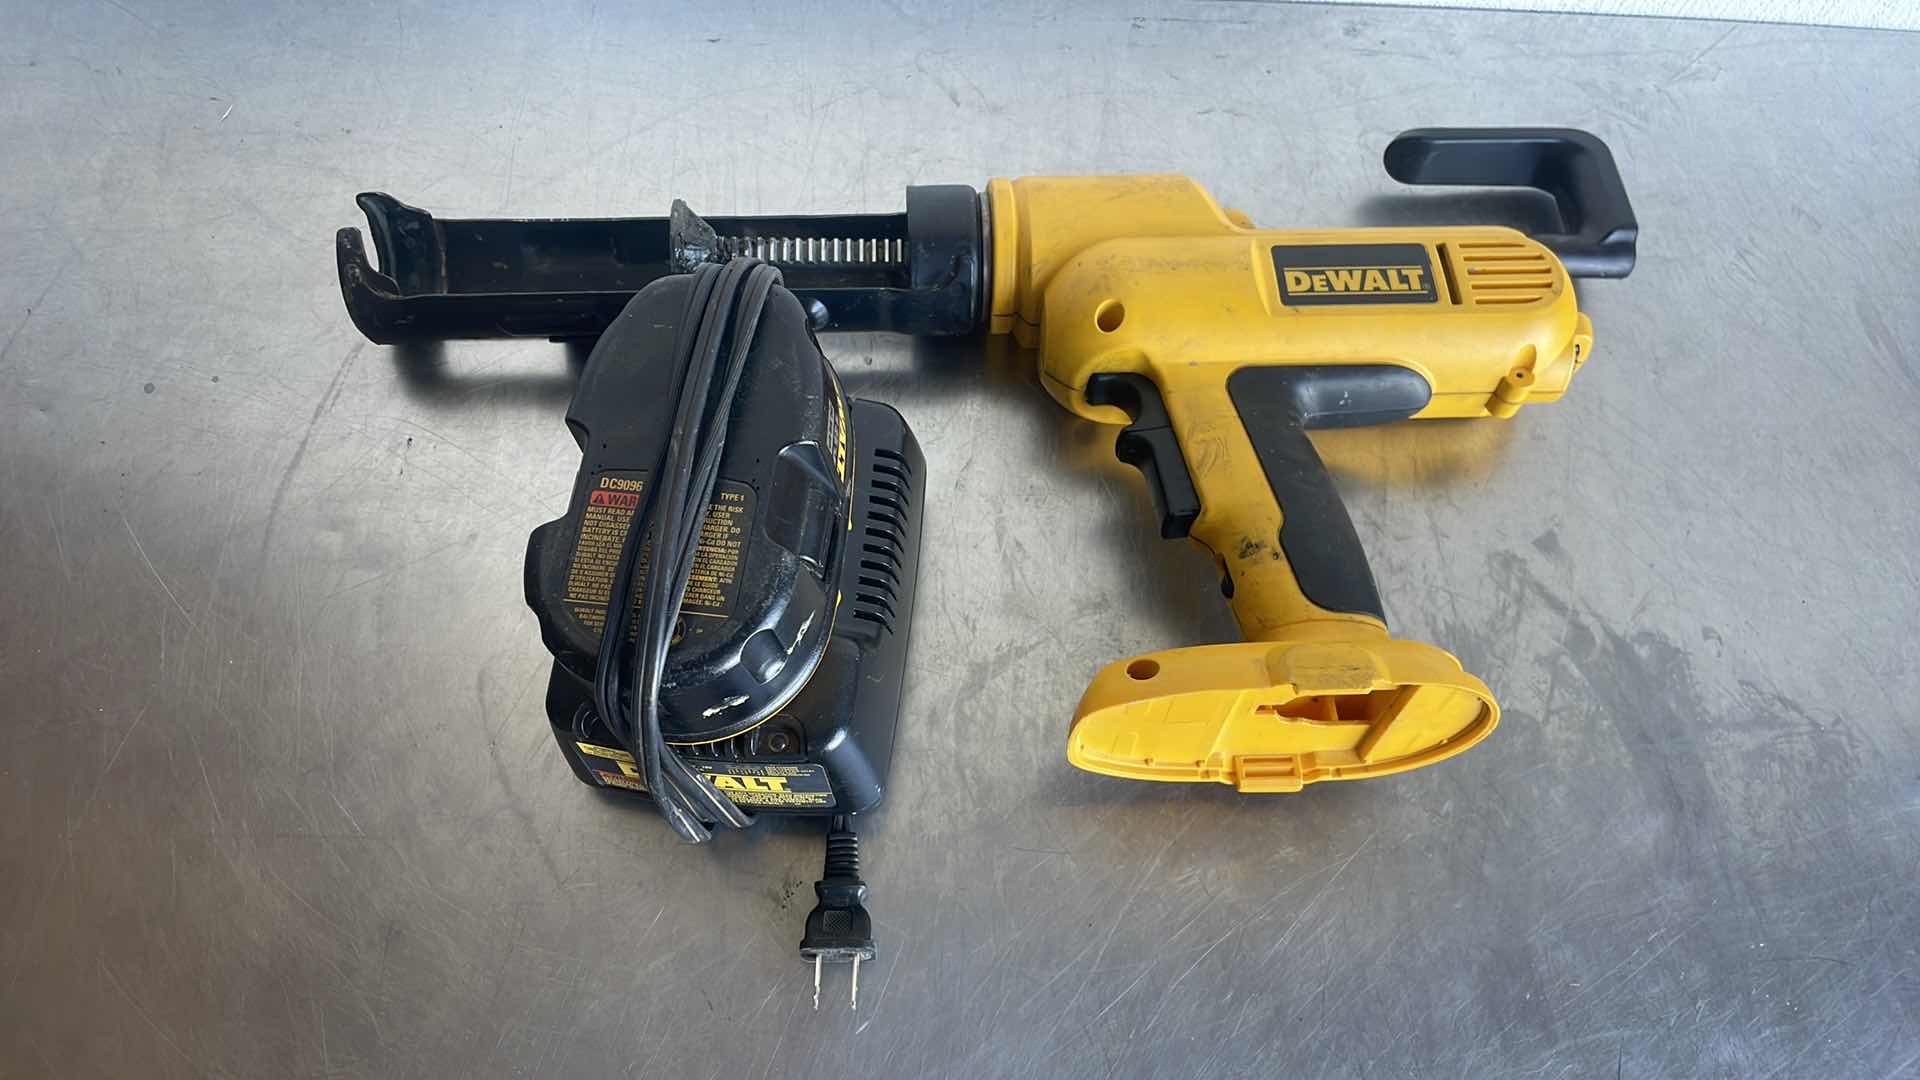 Photo 1 of DEWALT 18v HEAVY DUTY CORDLESS ADHESIVE GUN DC545 WITH BATTERY DC9096 & CHARGER DW9116